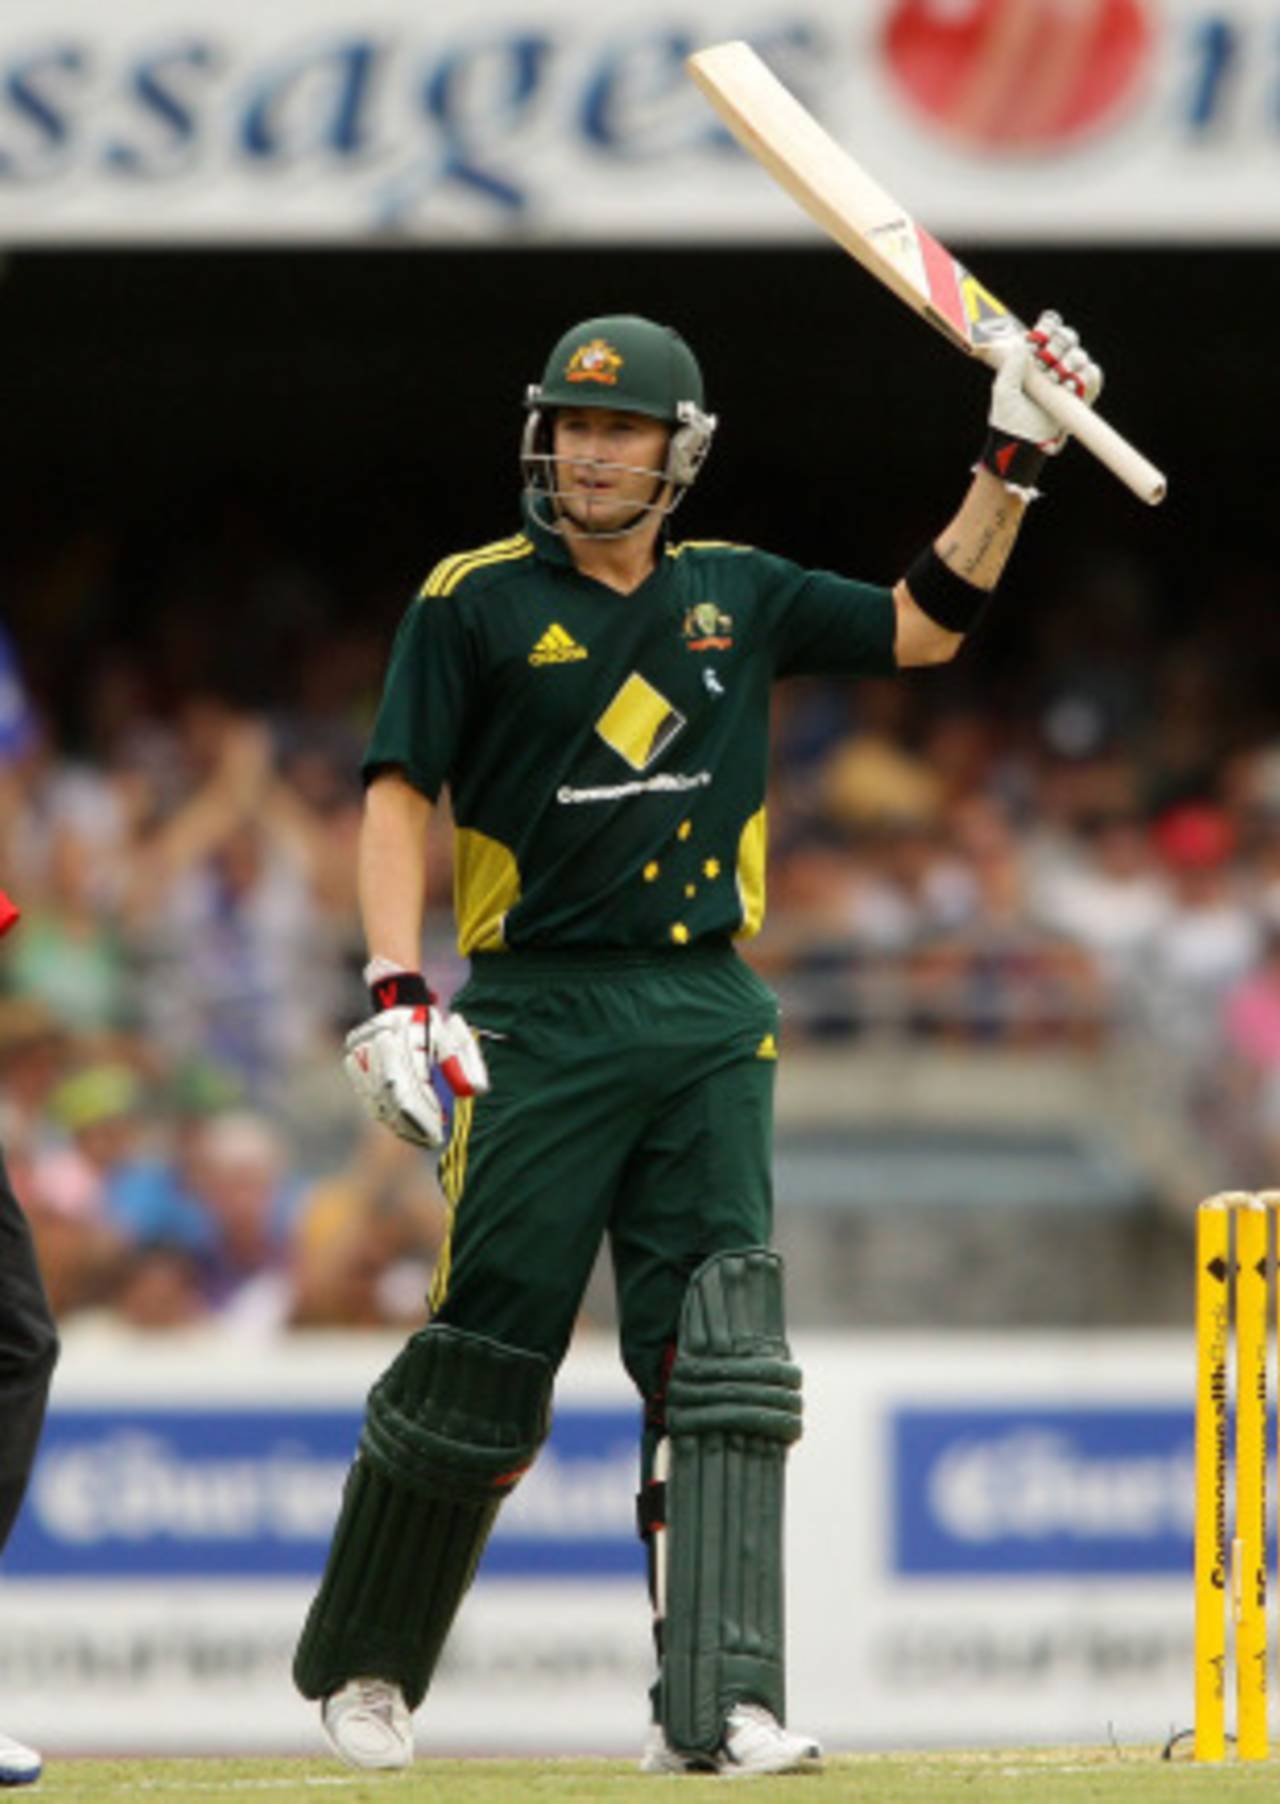 The crowd cheered Michael Clarke's half-century, though some had booed when he came to the crease&nbsp;&nbsp;&bull;&nbsp;&nbsp;Getty Images